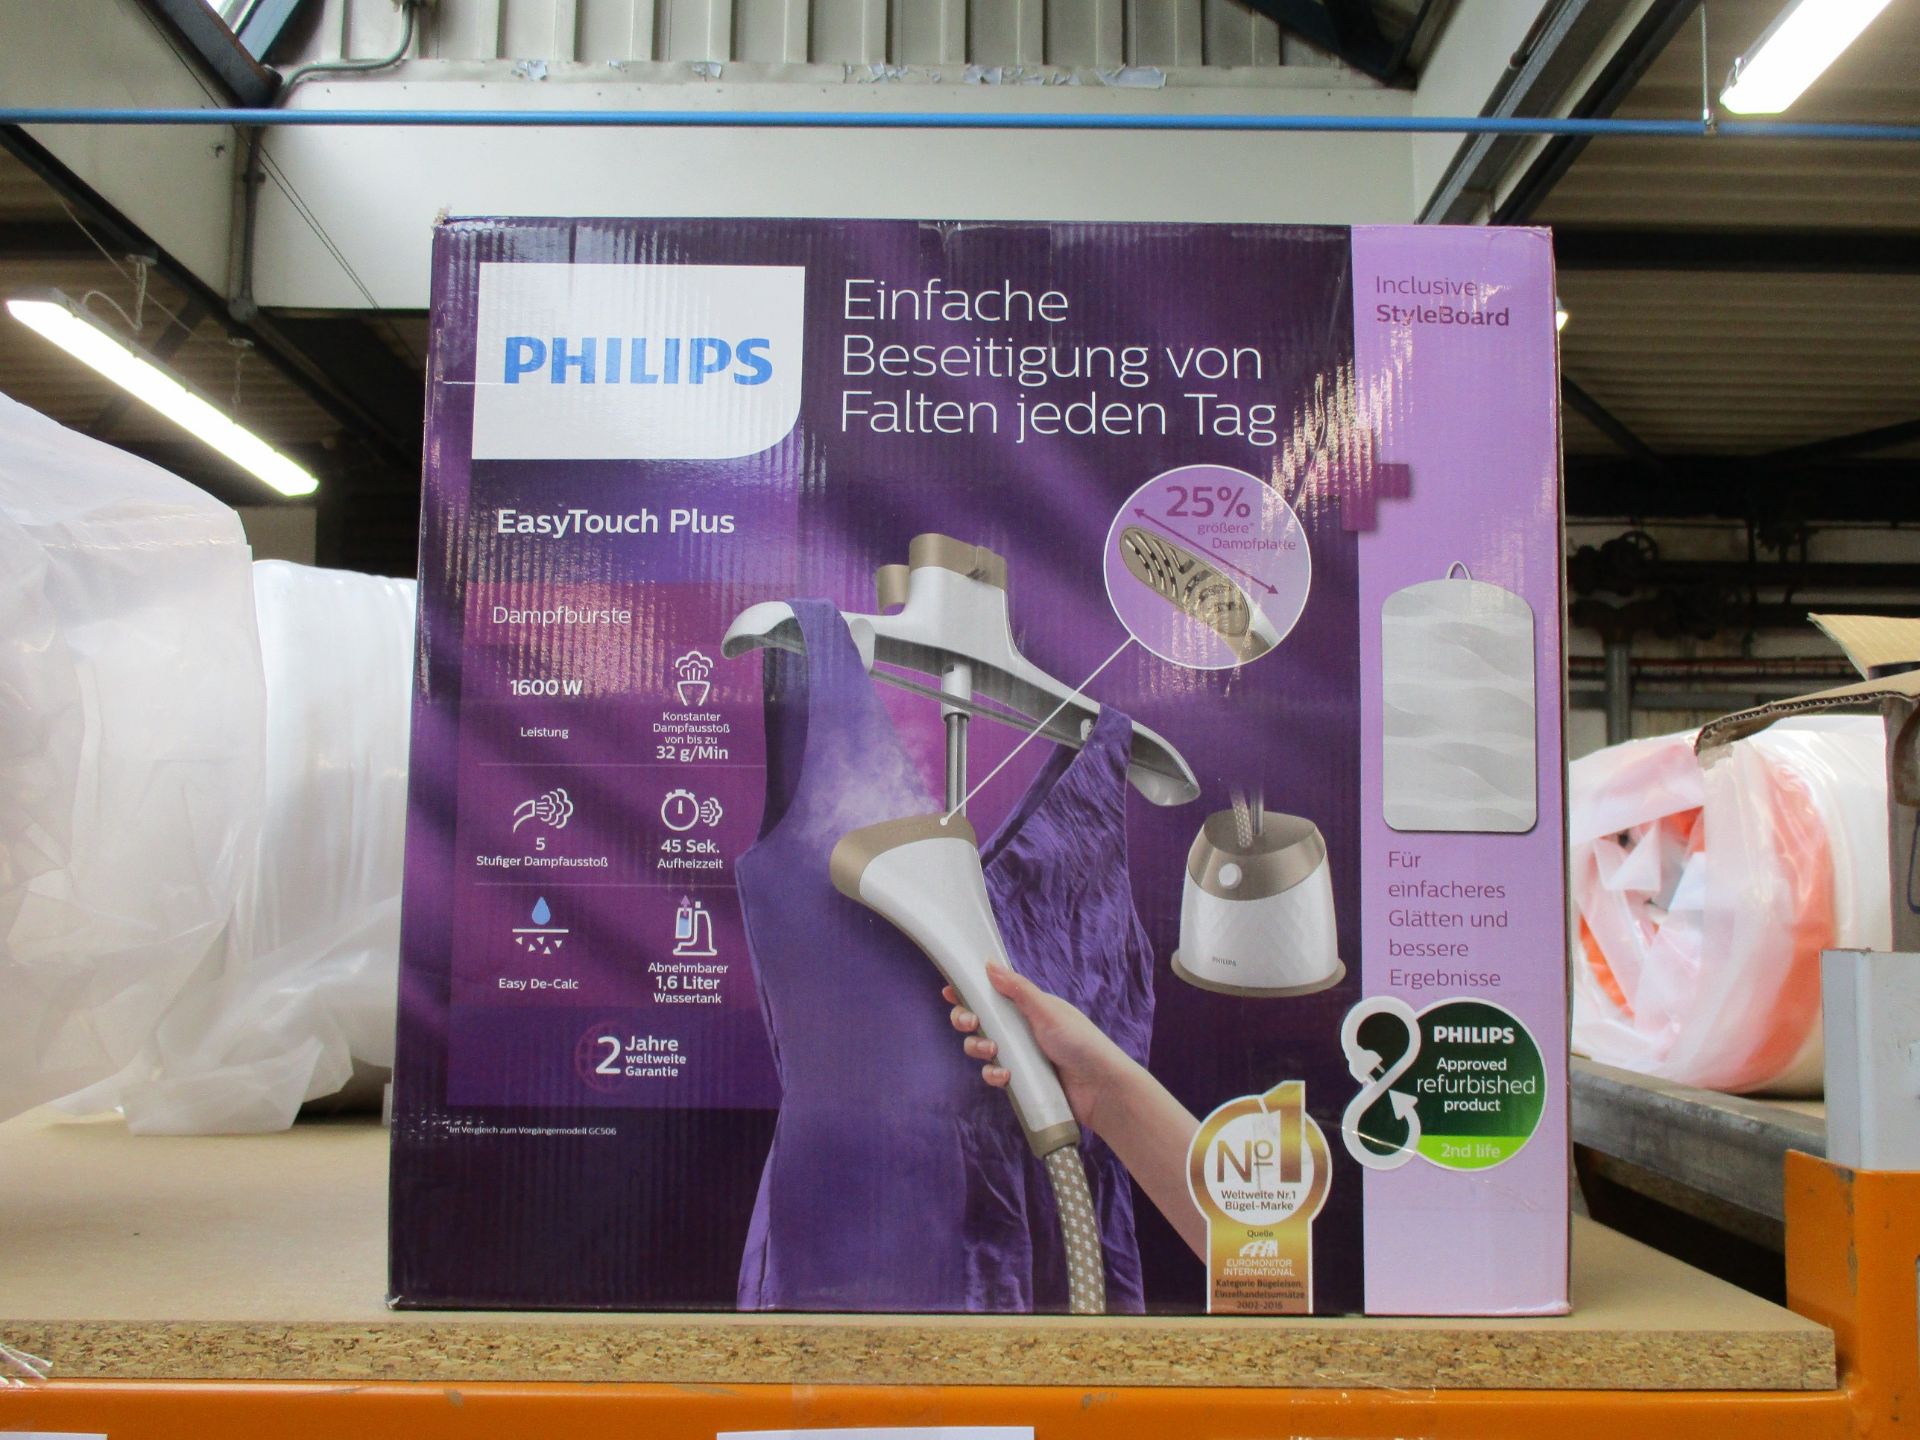 A boxed Philips EasyTouch garment steamer (GC524).